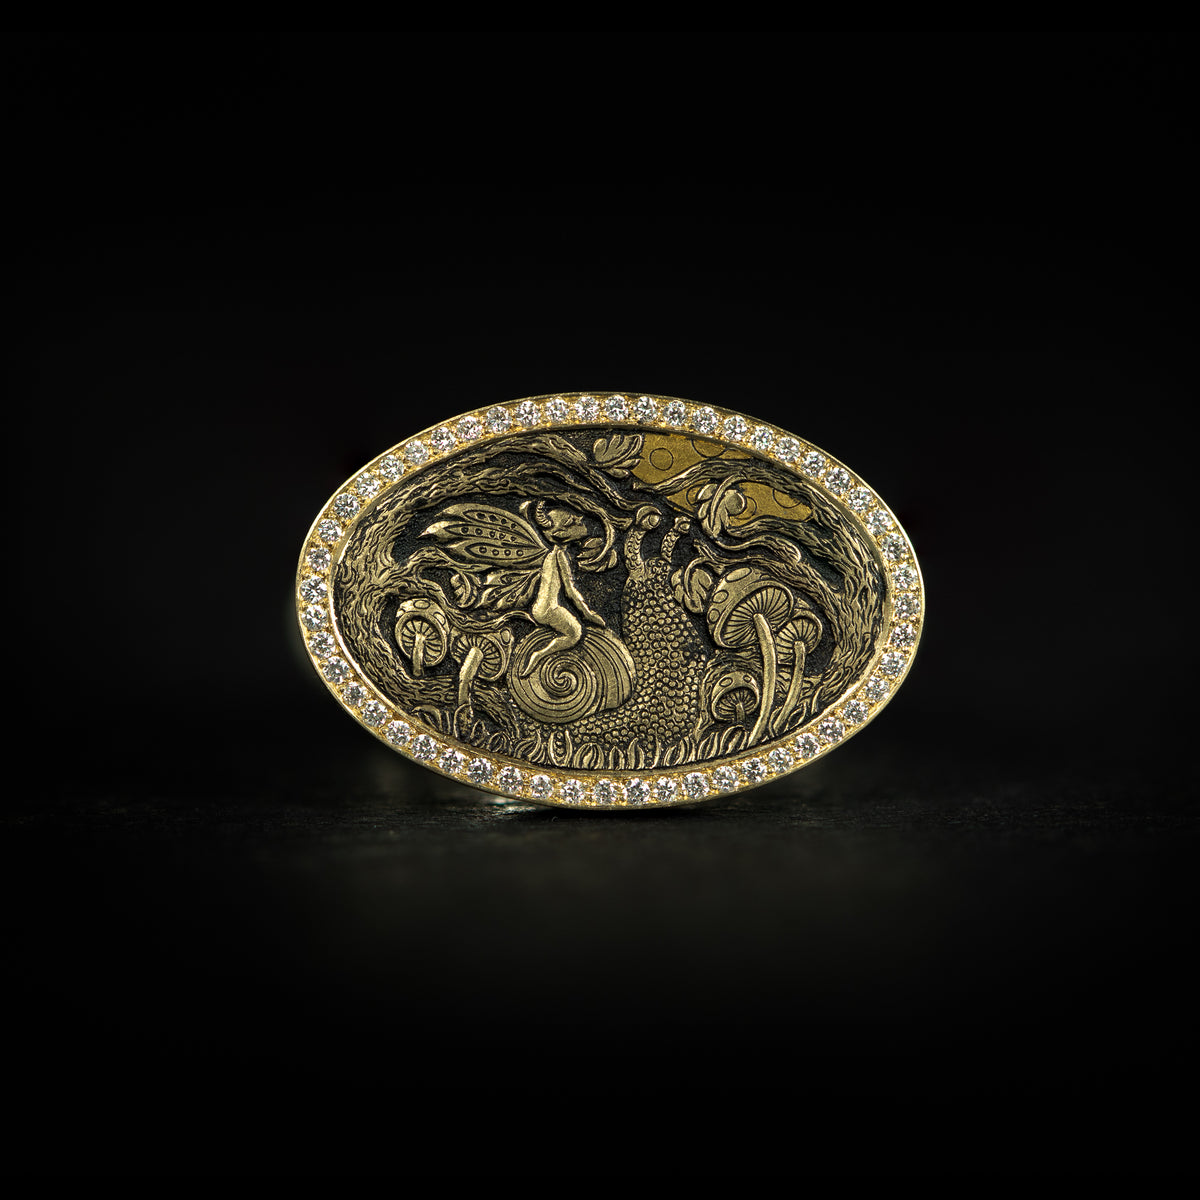 Hand engraved bas-relief fantasy signet ring. Features a fairy riding a snail amongst trees and mushrooms under the moon. 9 carat yellow gold top with diamonds and silver band. On black background face on.